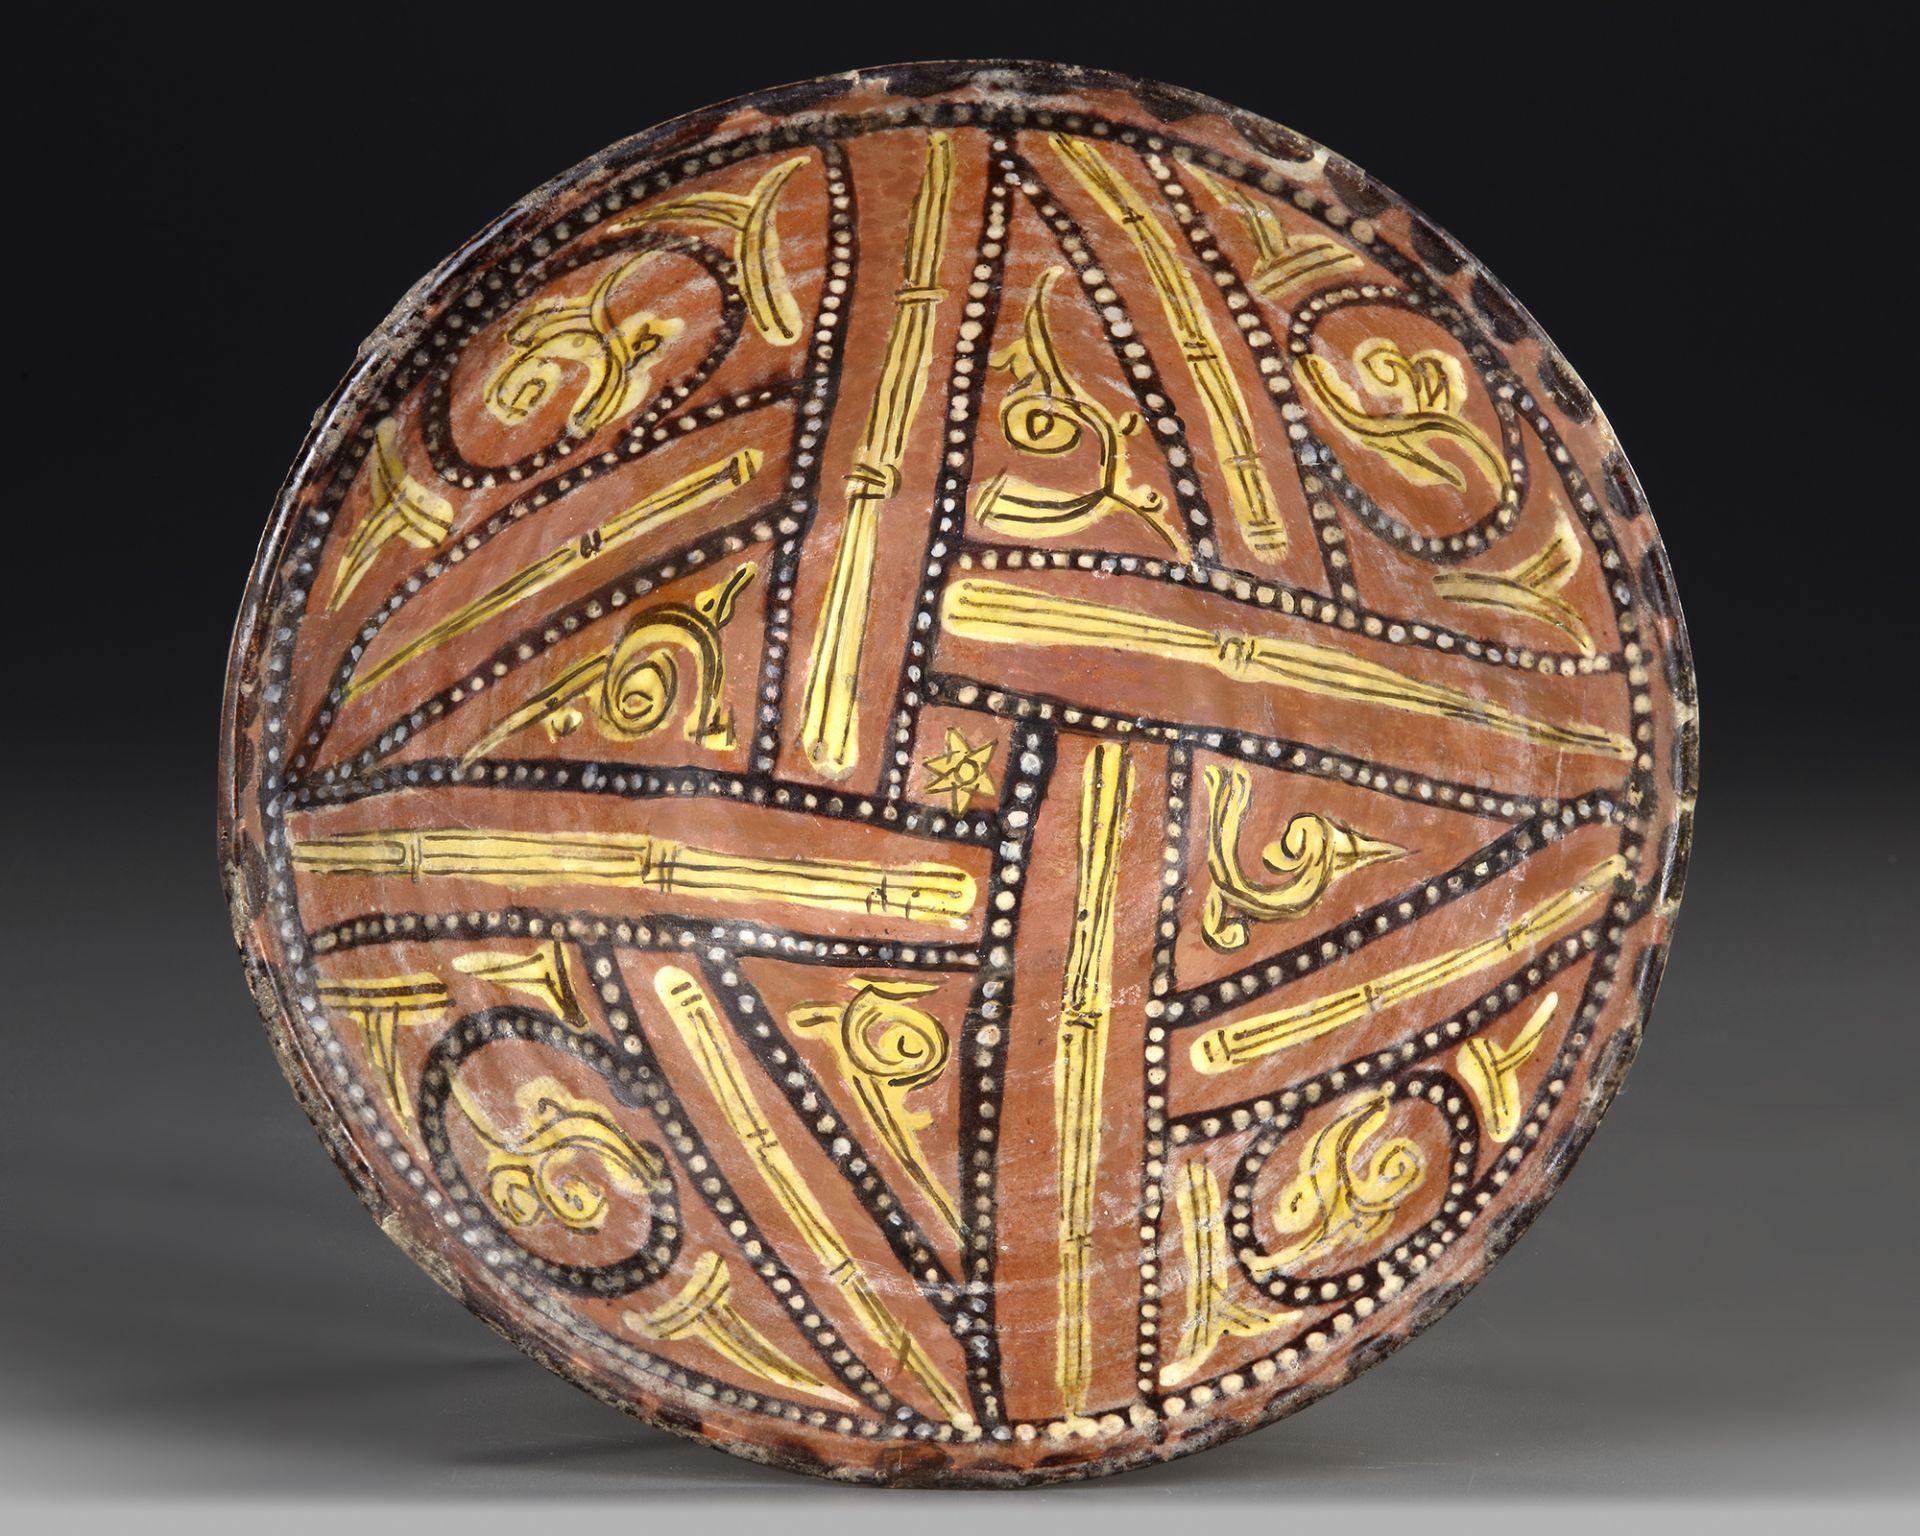 A NISHAPUR CONICAL POTTERY BOWL, PERSIA, 10TH CENTURY - Image 7 of 10